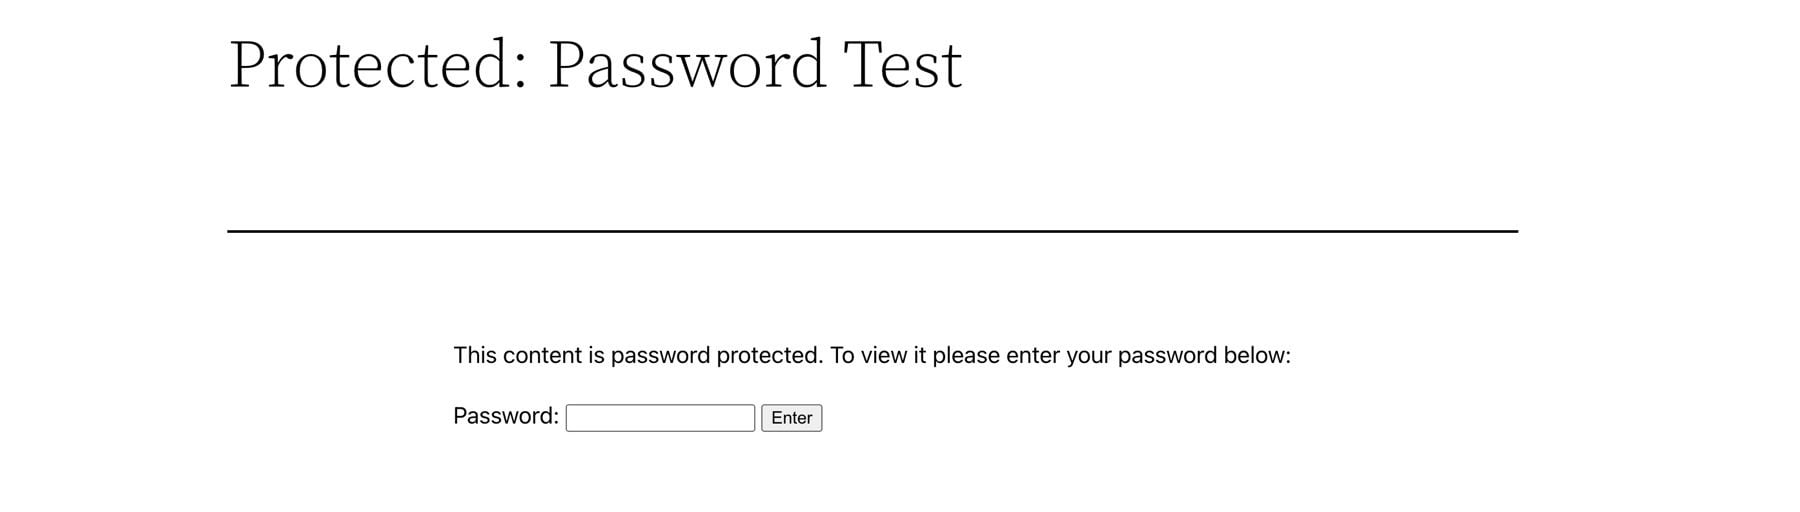 password protected page example